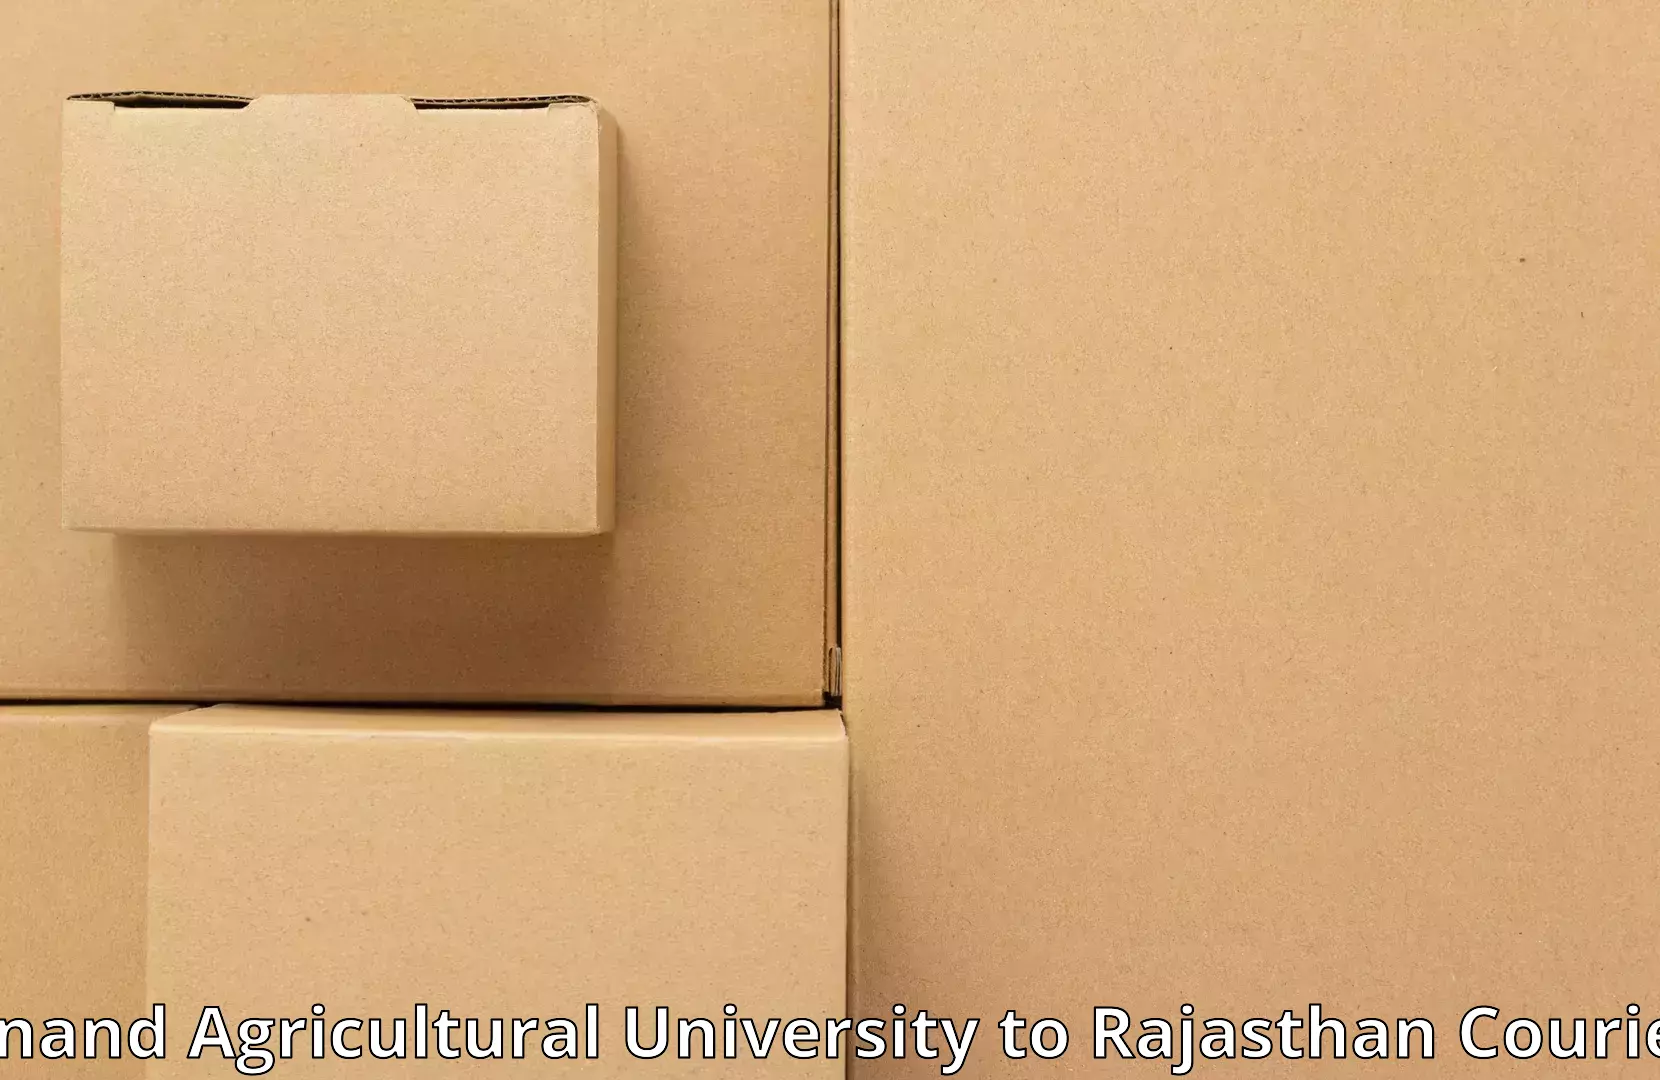 Moving and storage services in Anand Agricultural University to Bhilwara